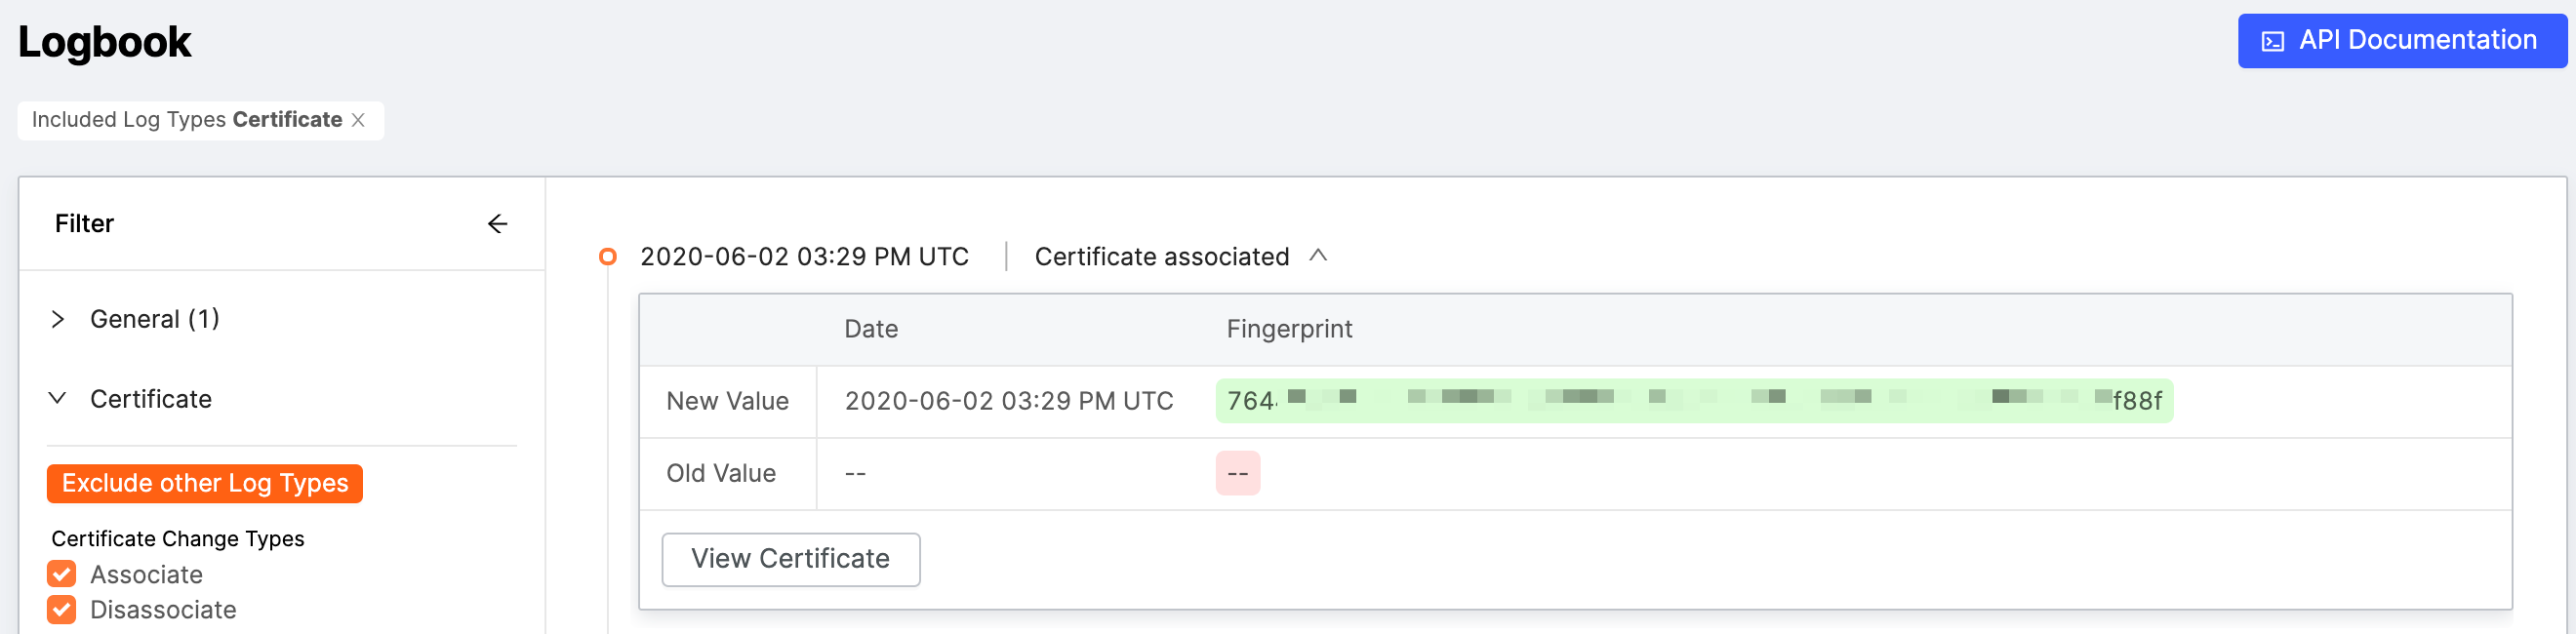 Logbook showing certificate event filter